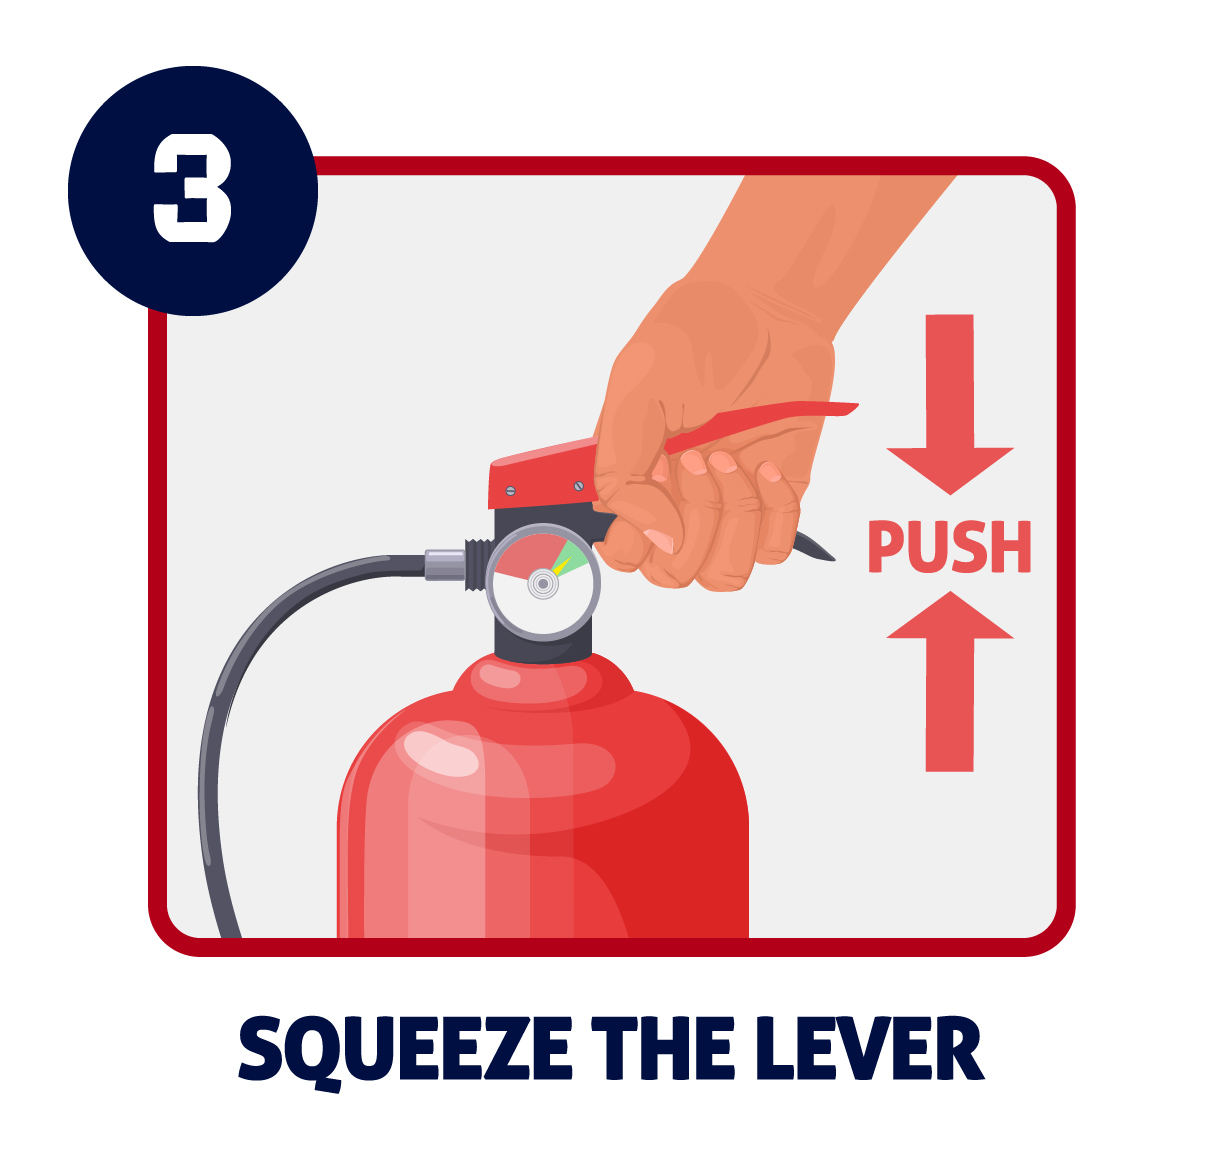 fire extinguisher instructional graphic with a cartoon hand squeezing the lever of a fire extinguisher